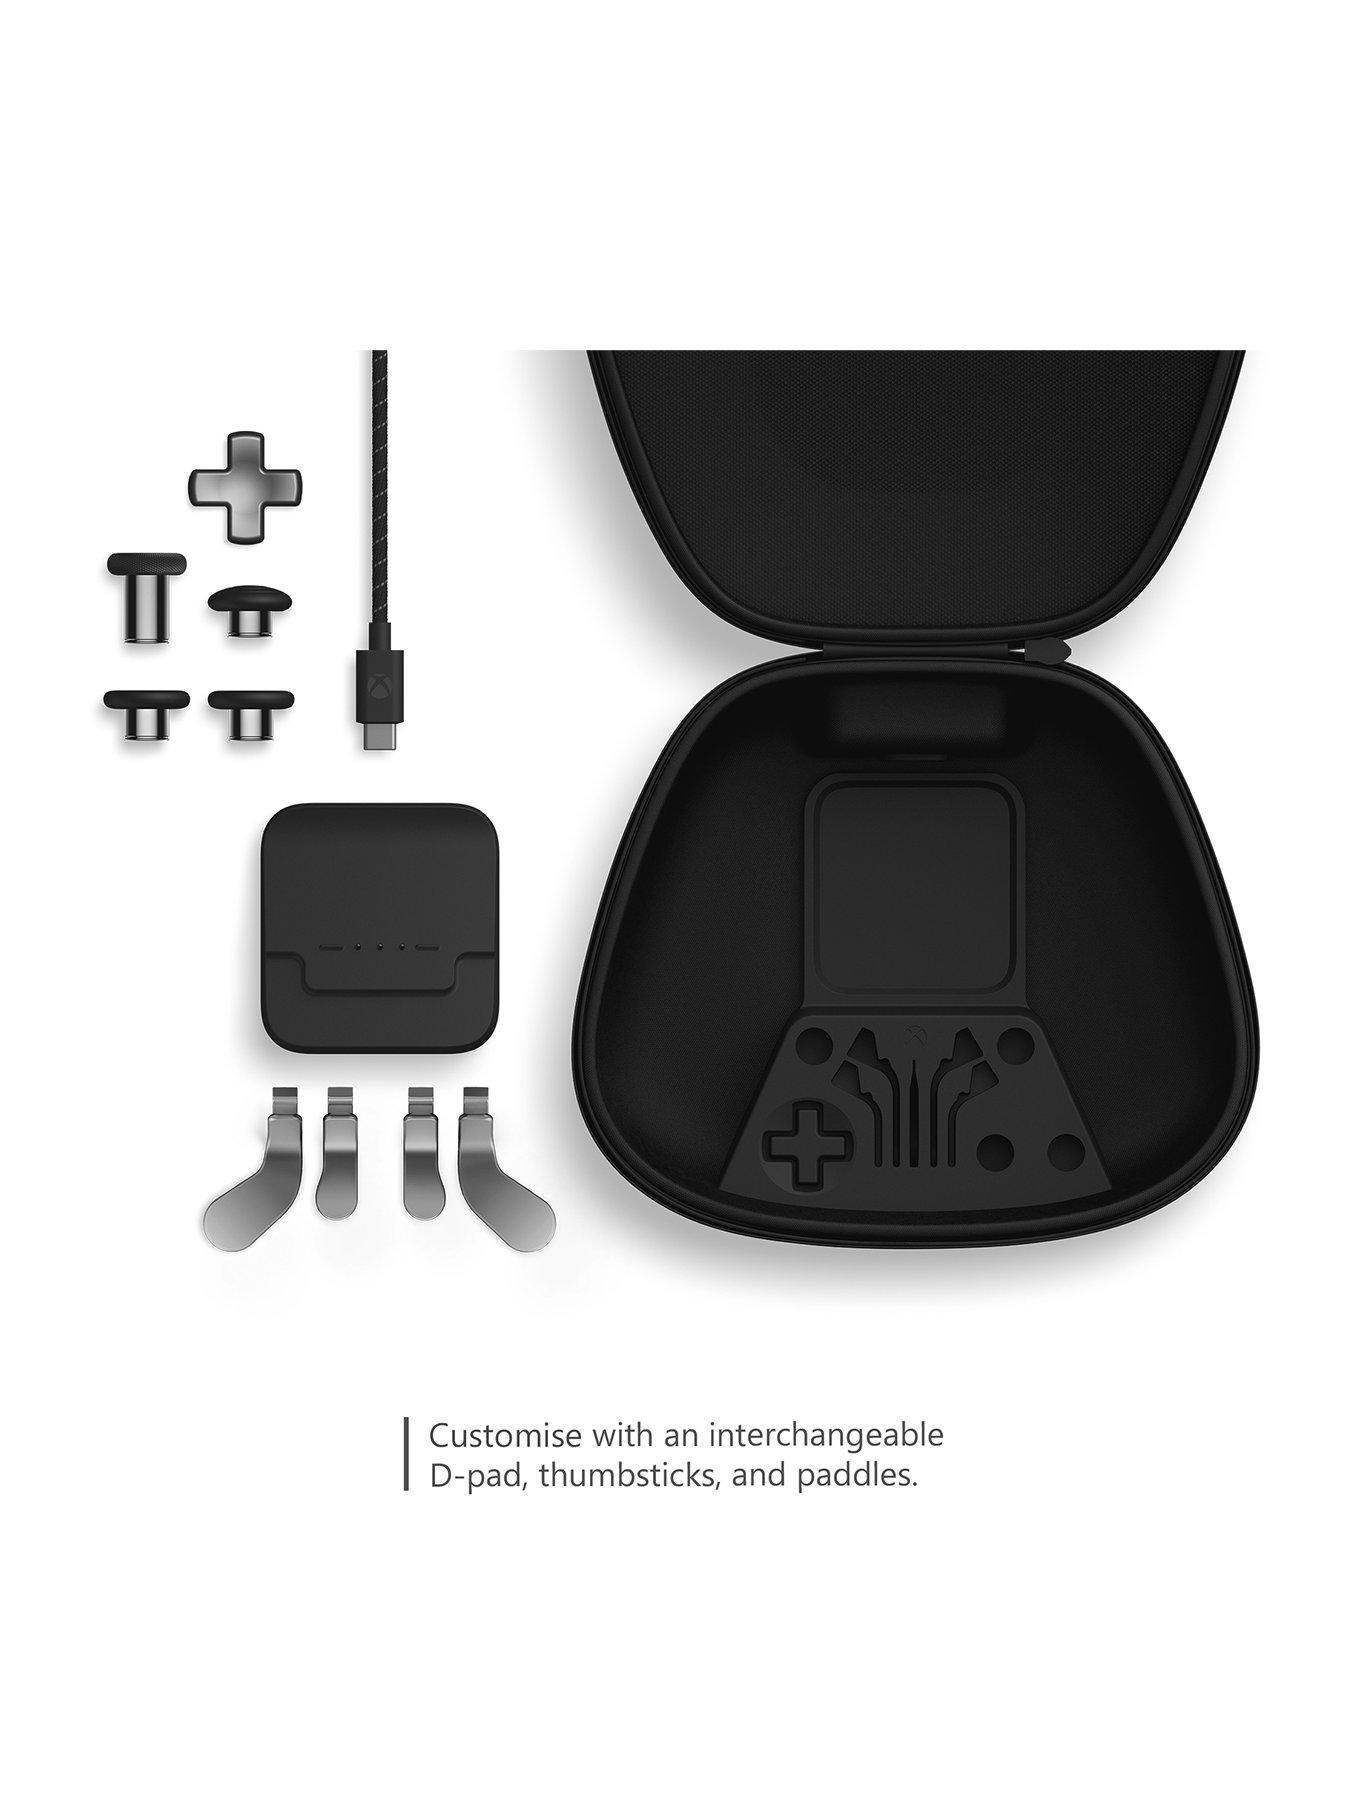 Carrying Case & Charging Dock for Xbox Elite Wireless Controller Series 2